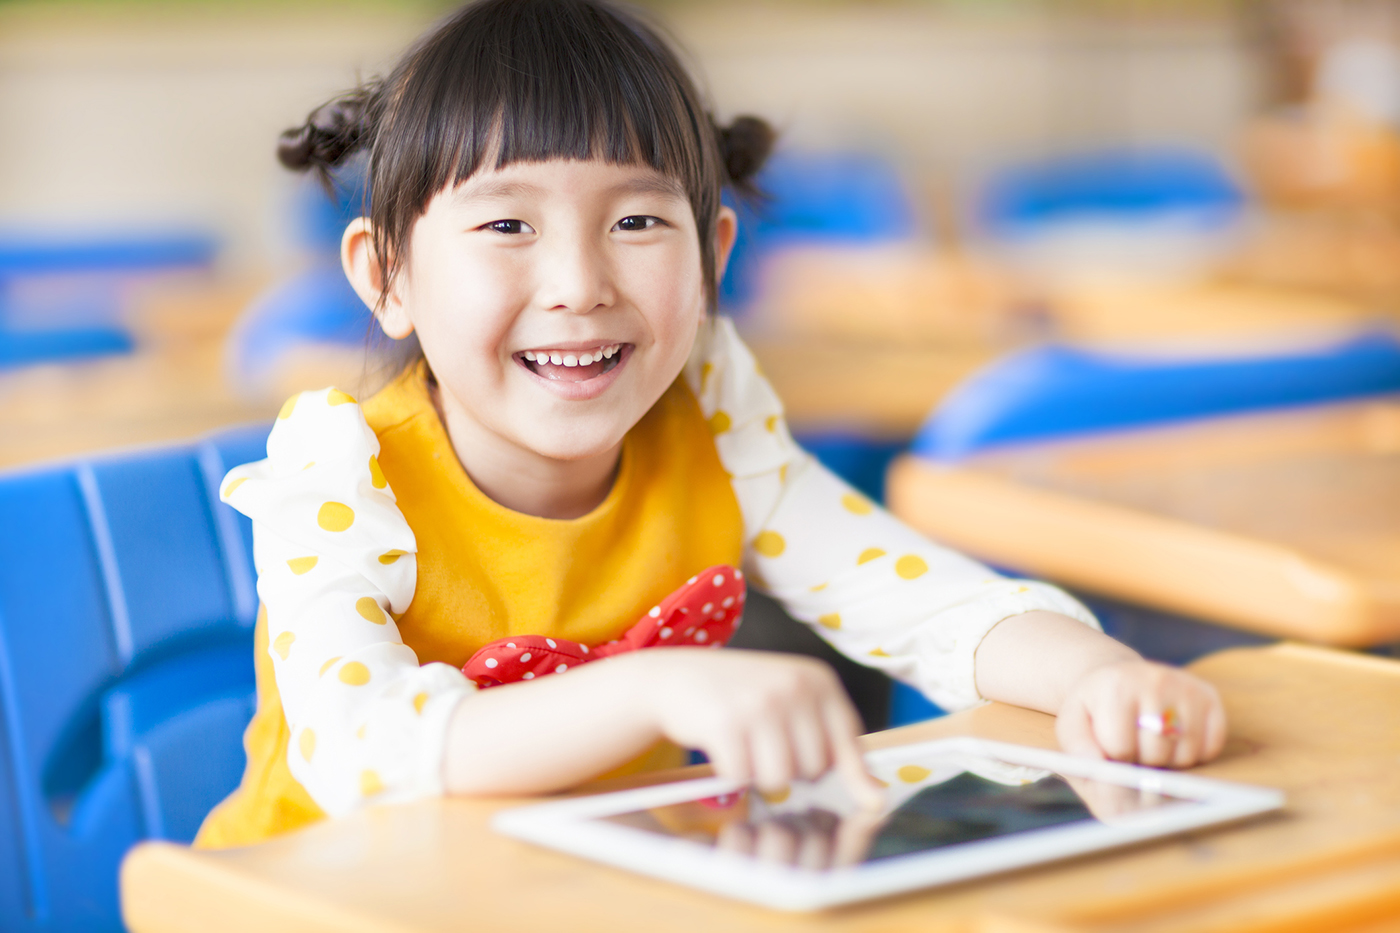 Happy girl on tablet - photo by iStock/Tomwang112